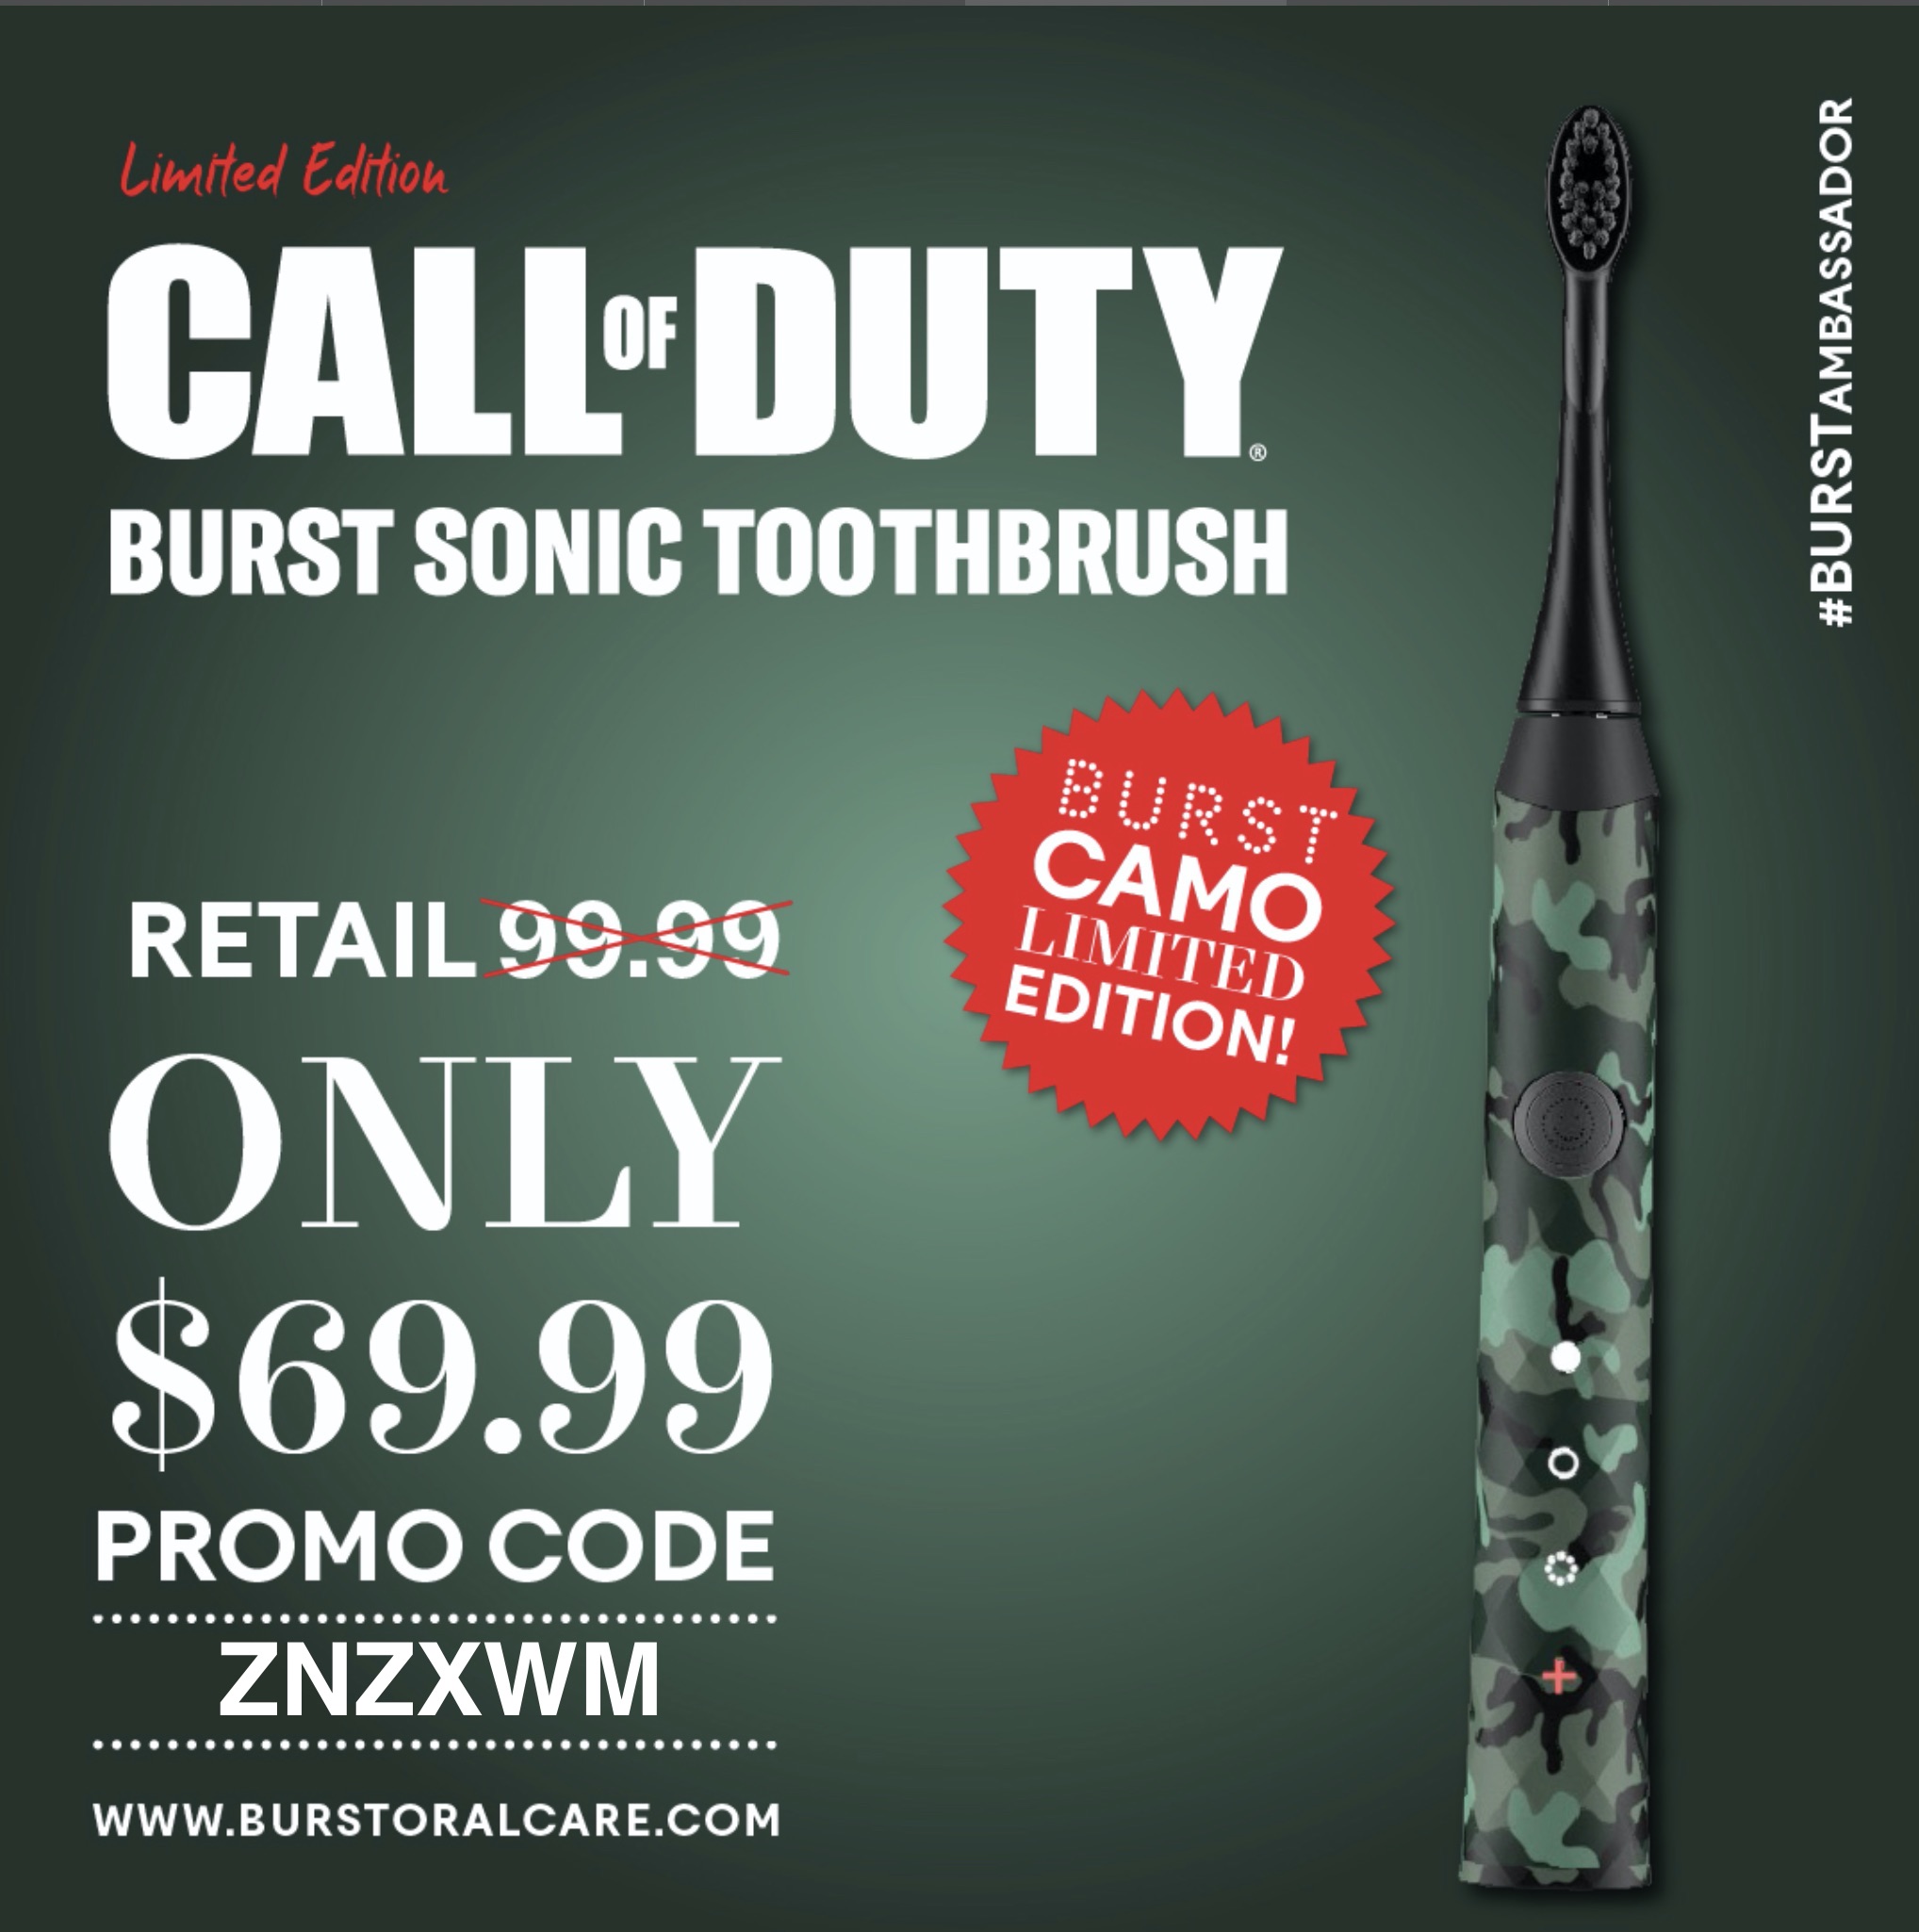 Burat Electric Toothbrush Call of Duty coupon Code